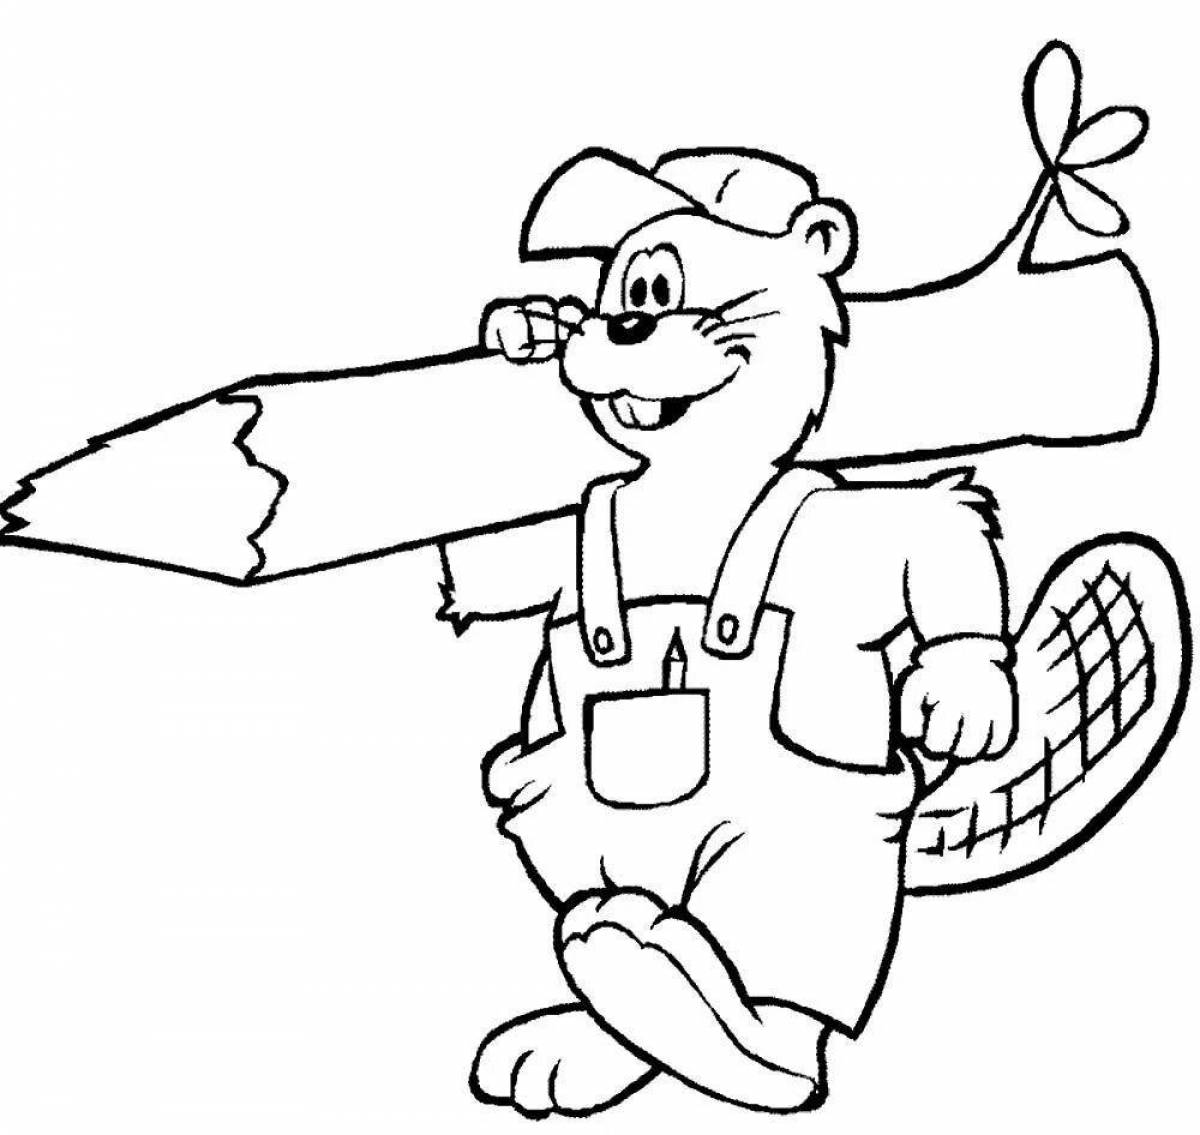 Adorable beaver coloring page for kids